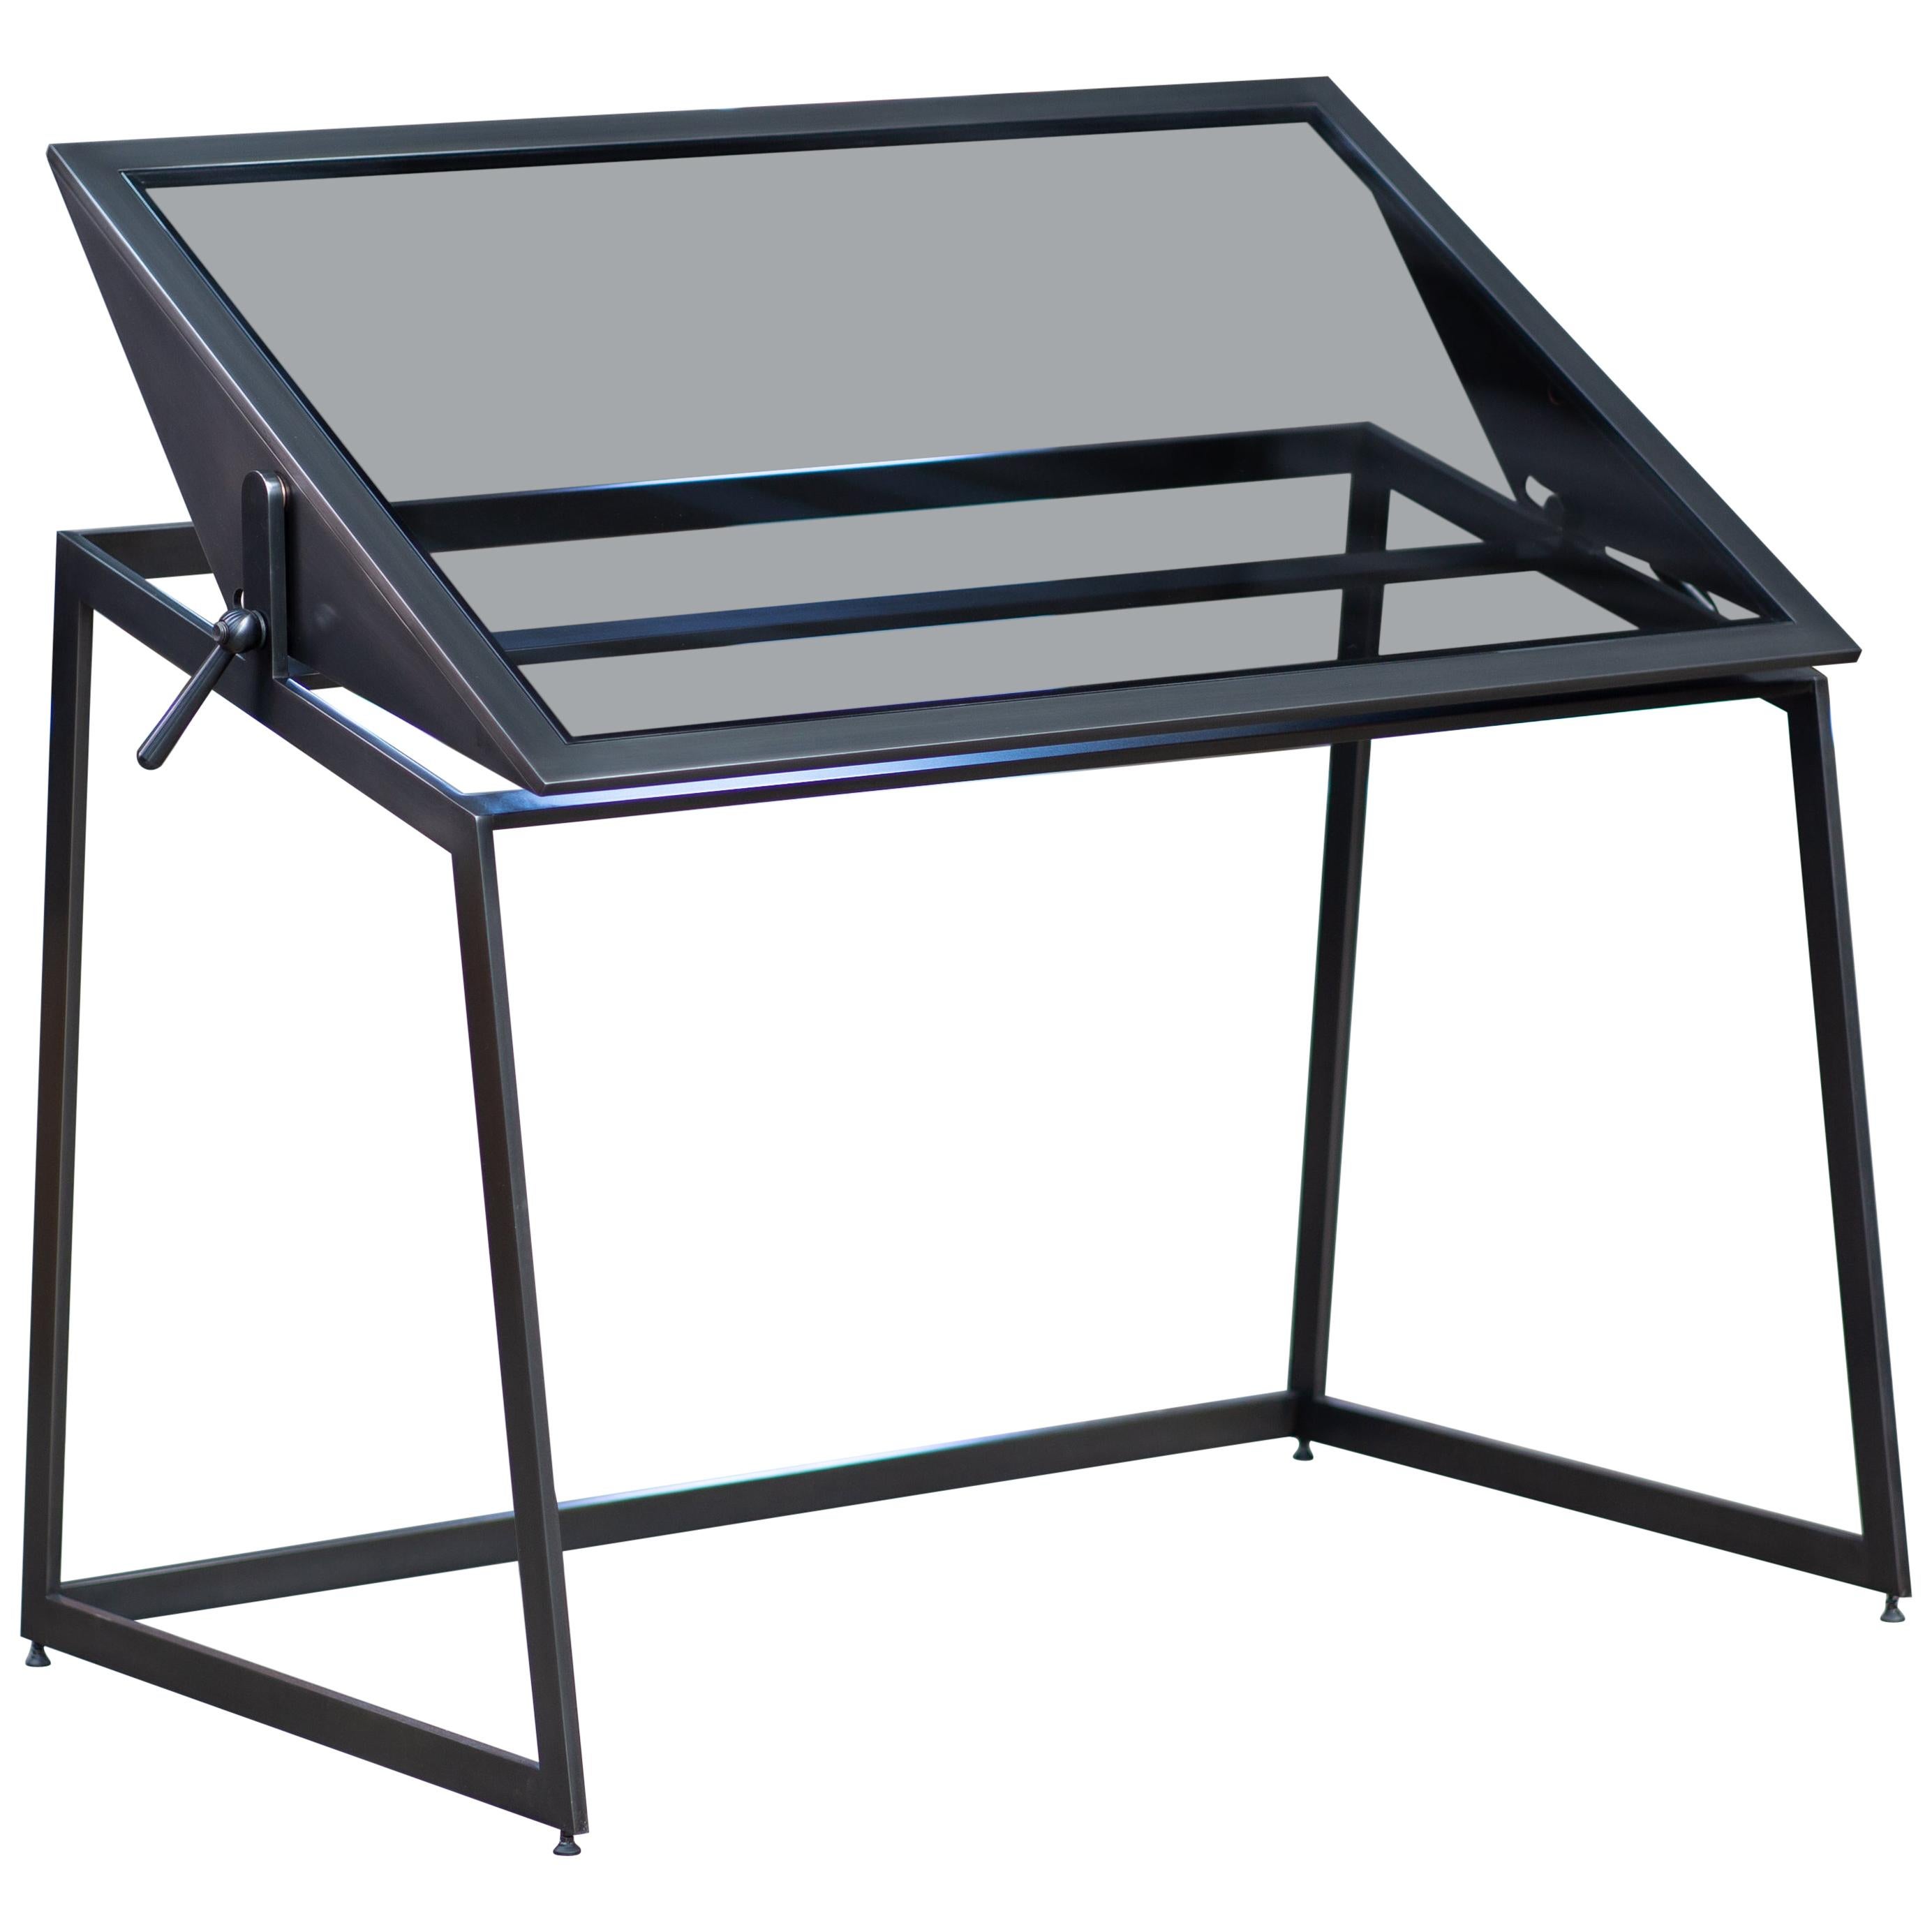 Pivoting Drafting Table, Blackened Steel and Smoked Glass, by Force/Collide For Sale